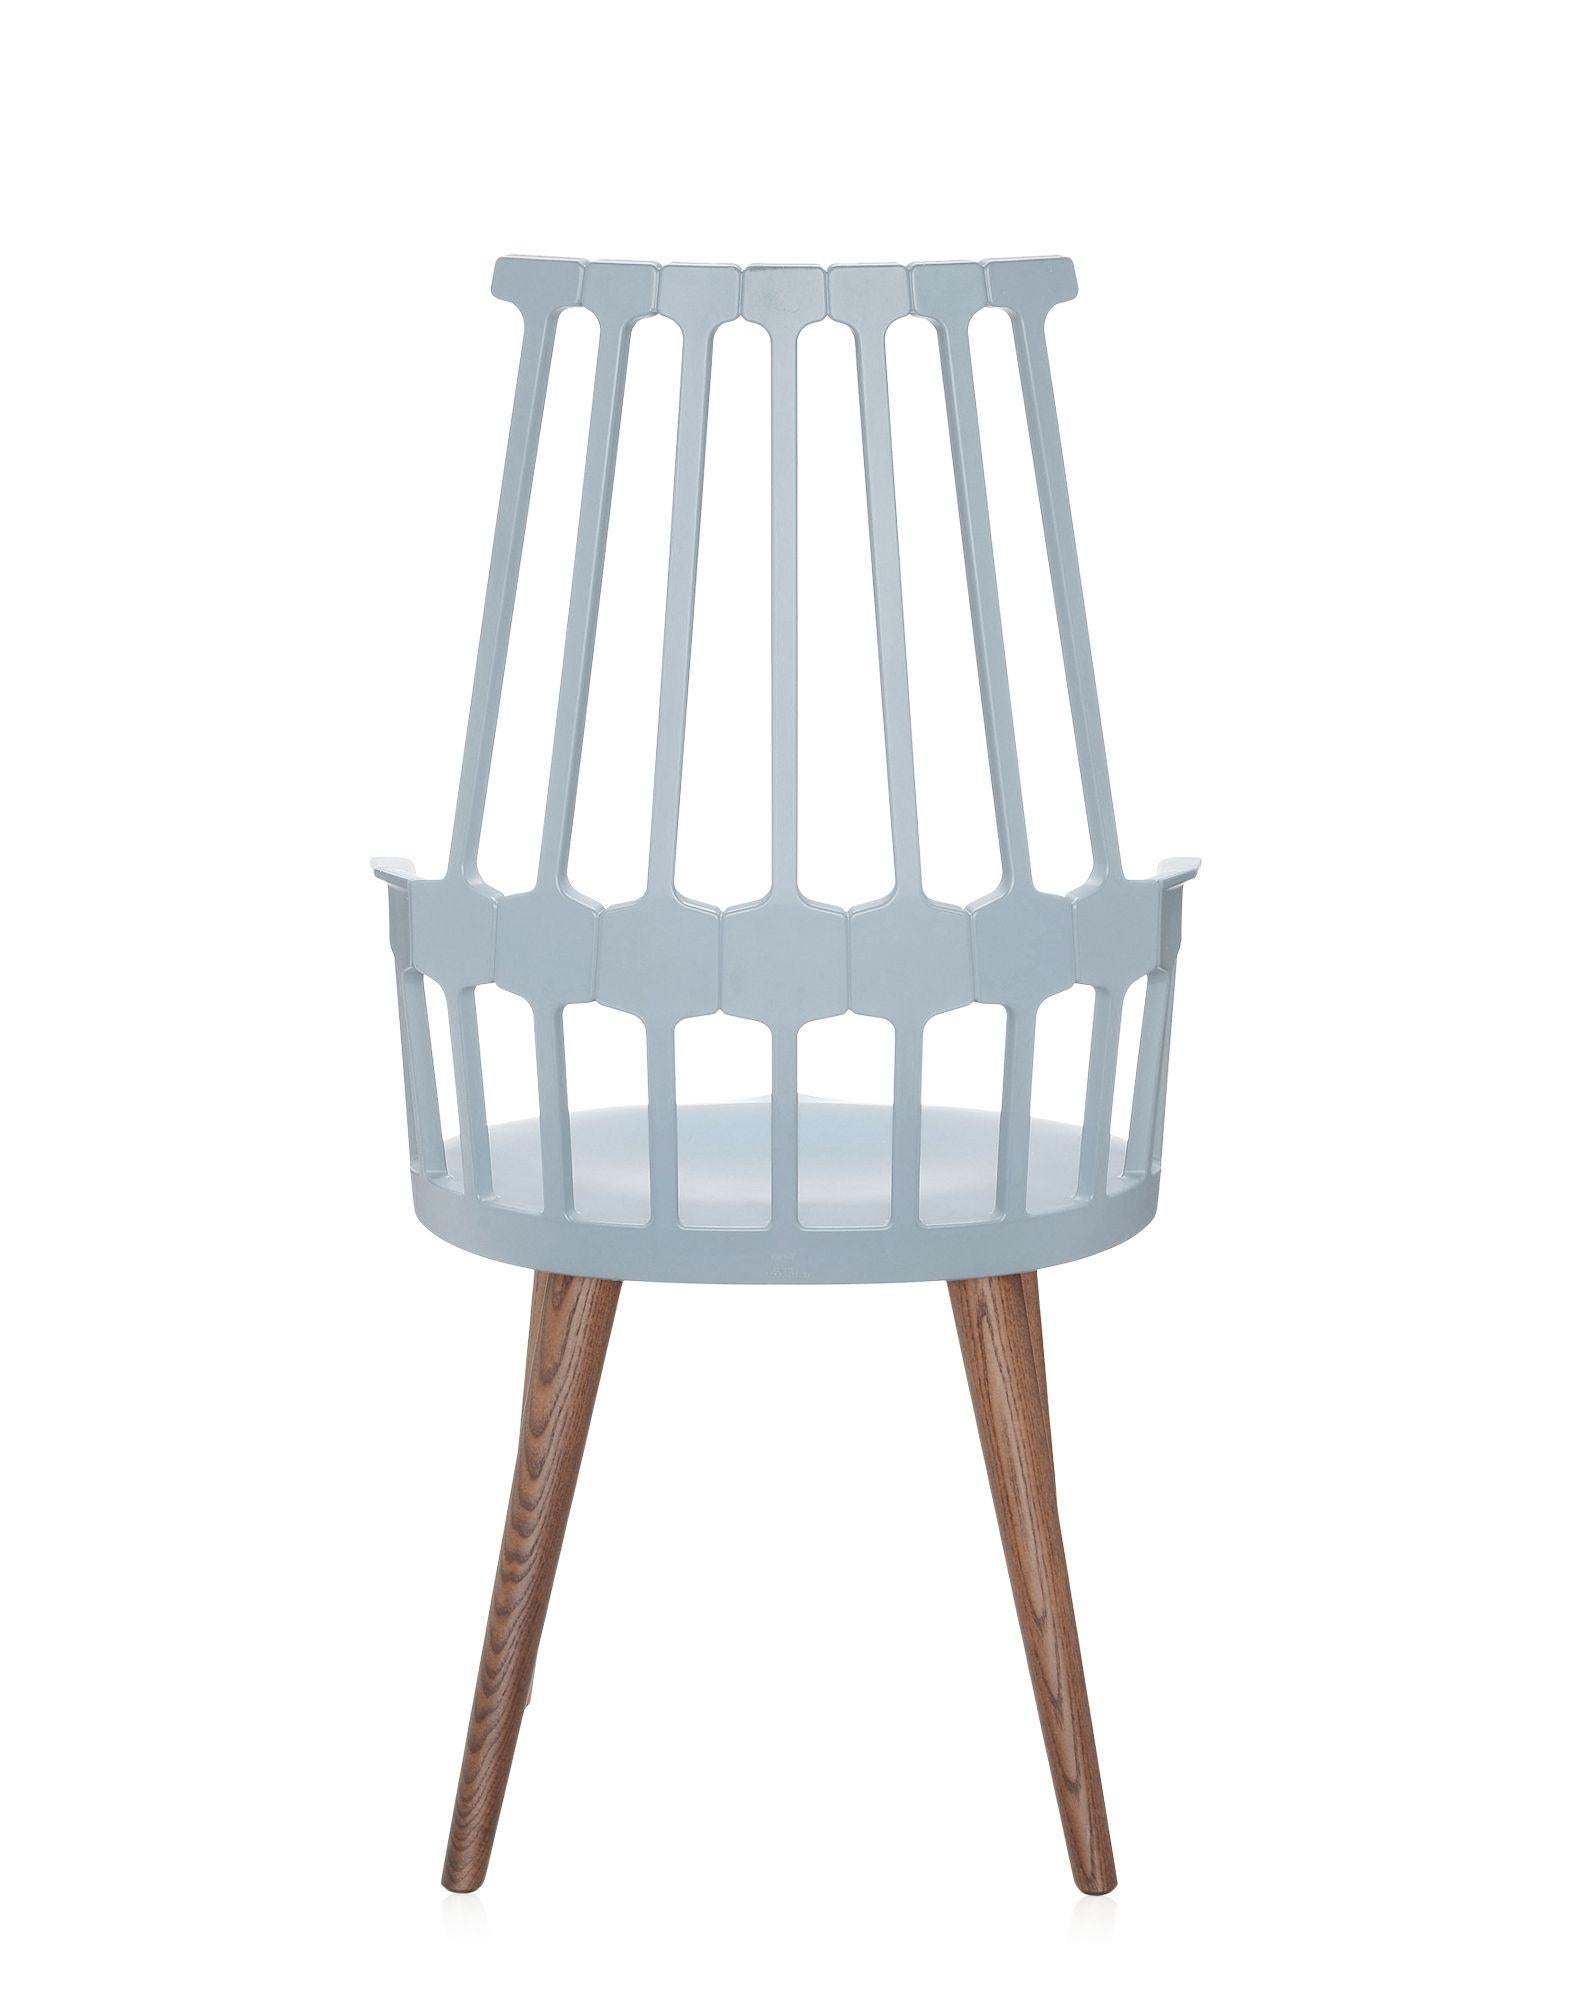 Italian Set of 2 Kartell Comback Chairs in Grey Blue with Oak Legs by Patricia Urquiola For Sale